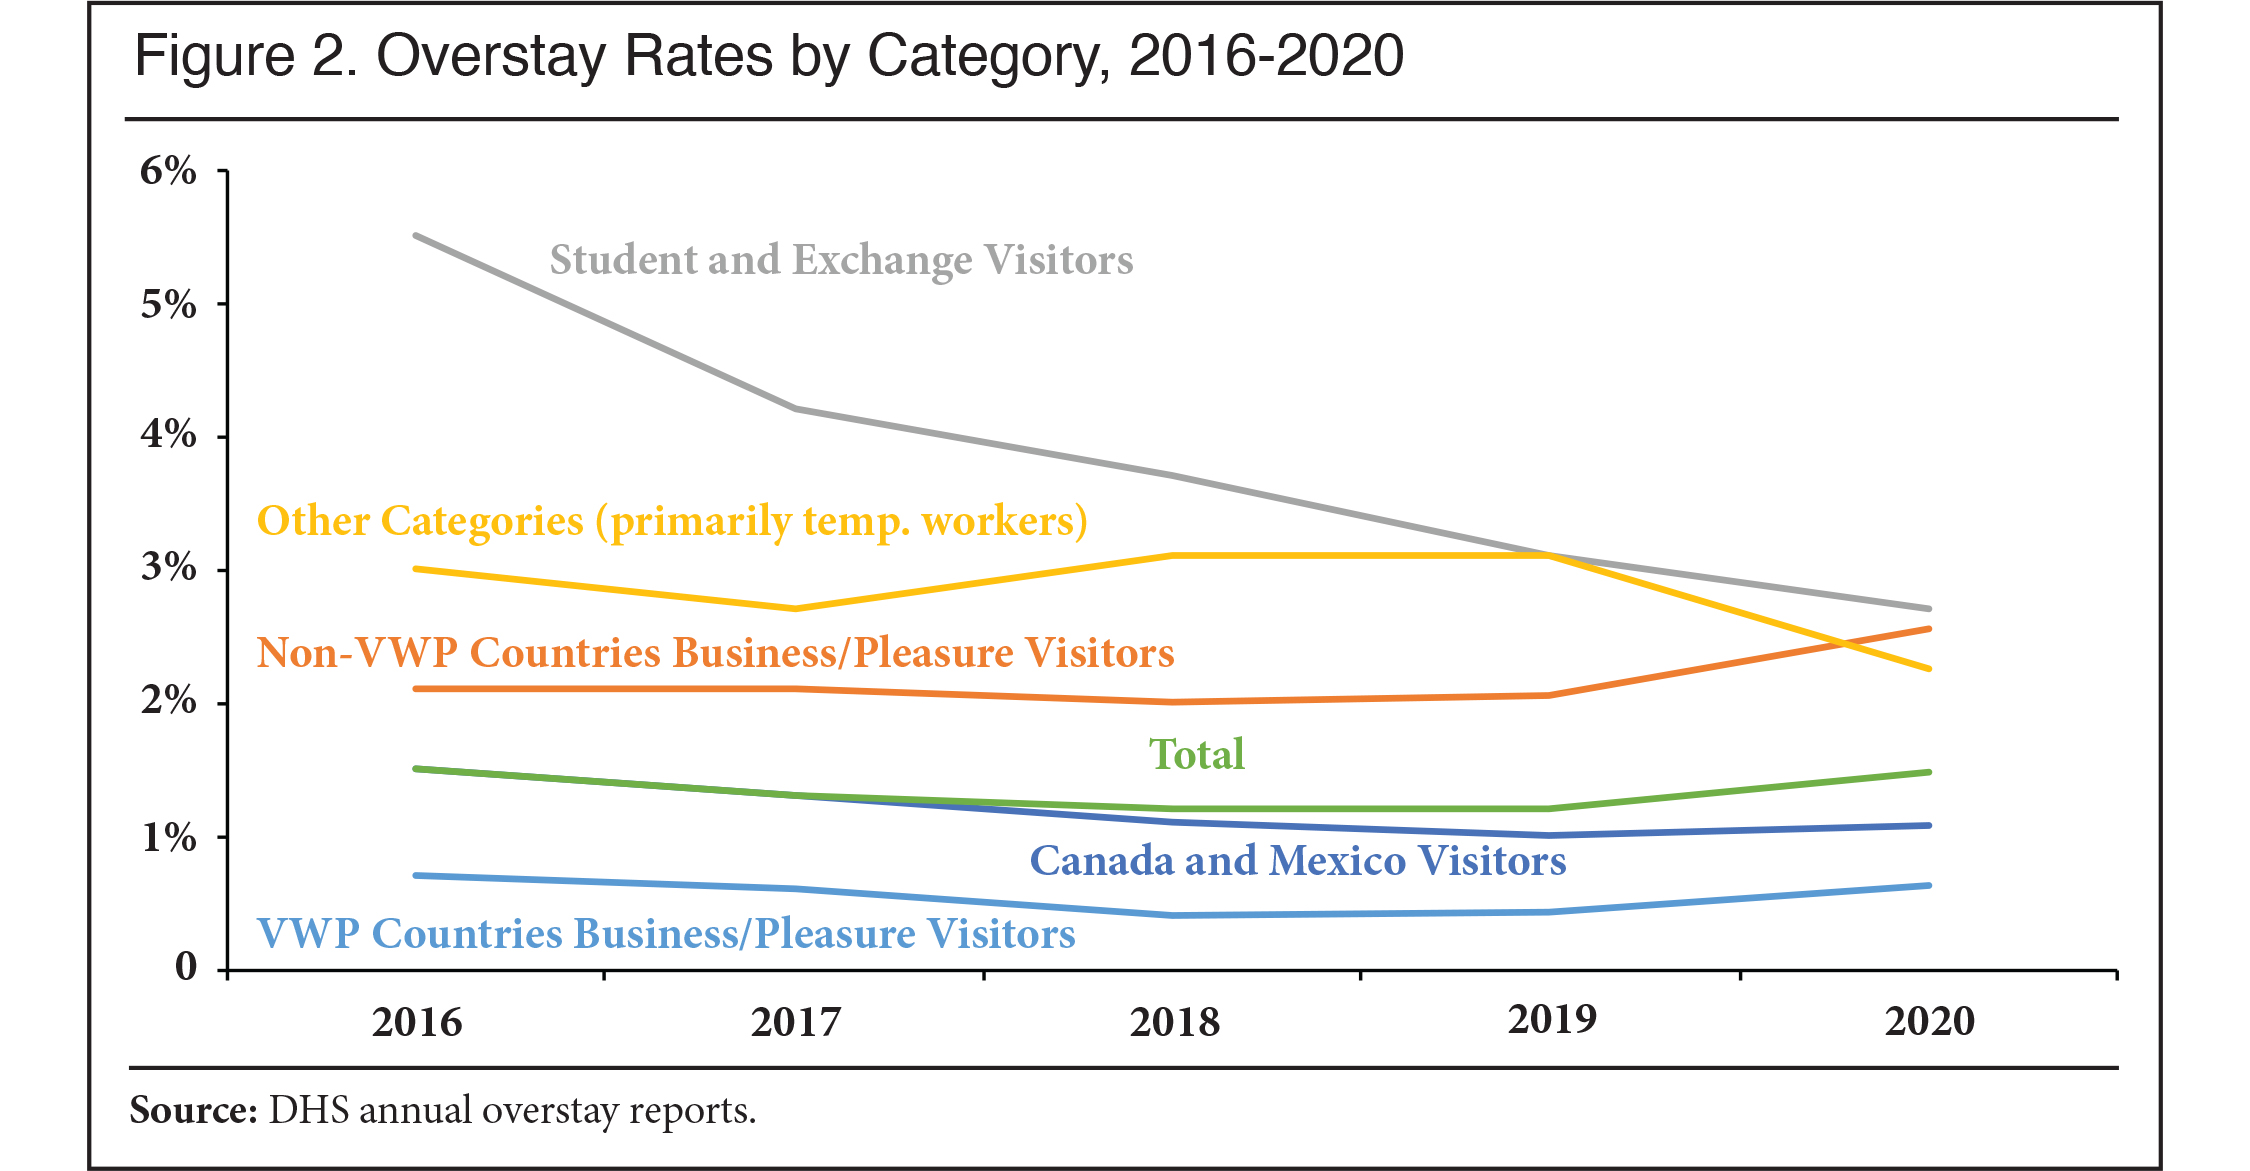 Graph: Overstay Rates by Category, 2016 to 2020